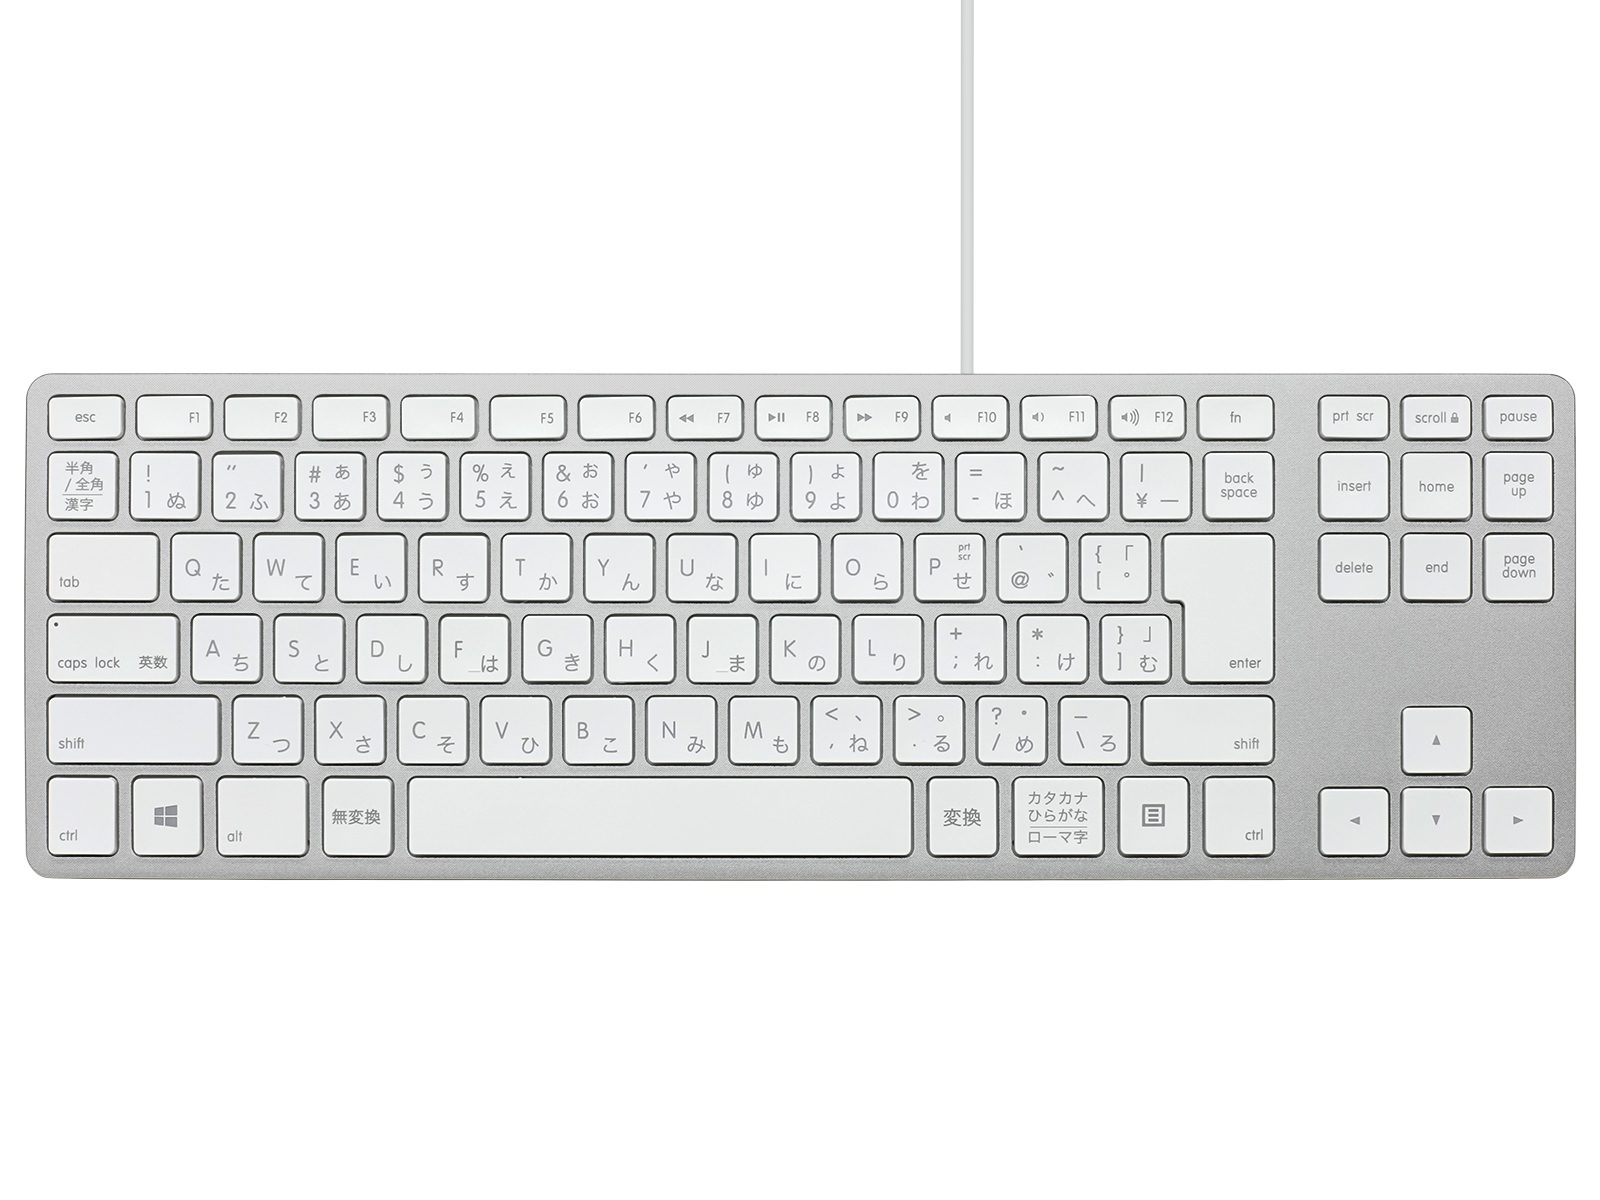 Matias Wired Aluminum Tenkeyless keyboard for PC: image 1 of 6 thumb